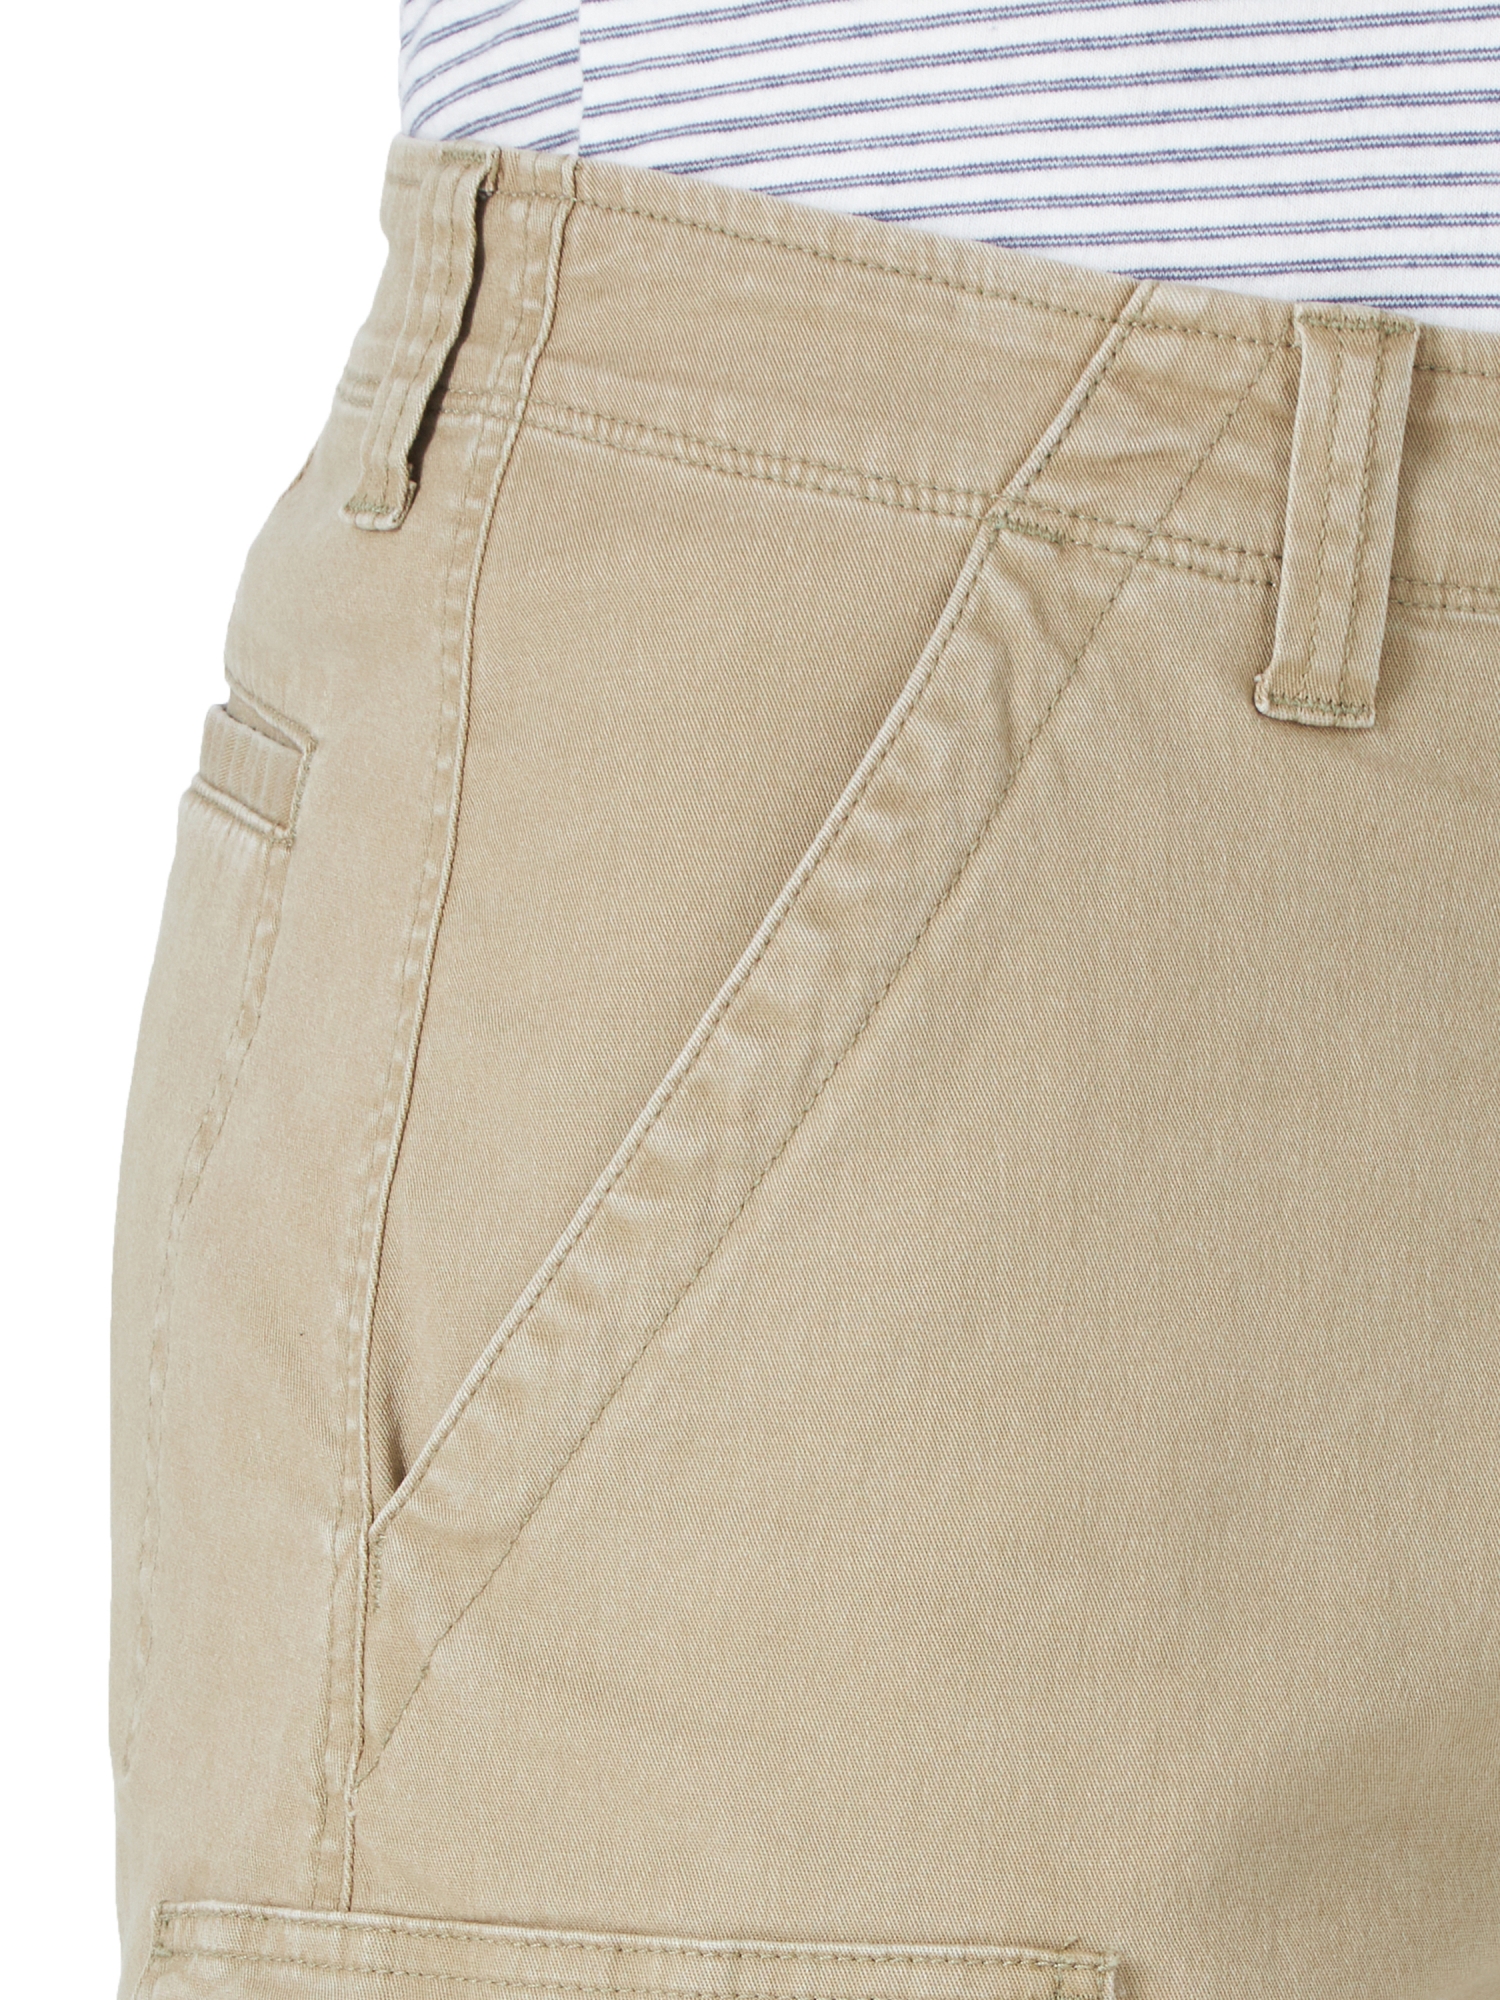 Wrangler Men's and Big Men's 10" Relaxed Fit Cargo Shorts With Stretch - image 2 of 8